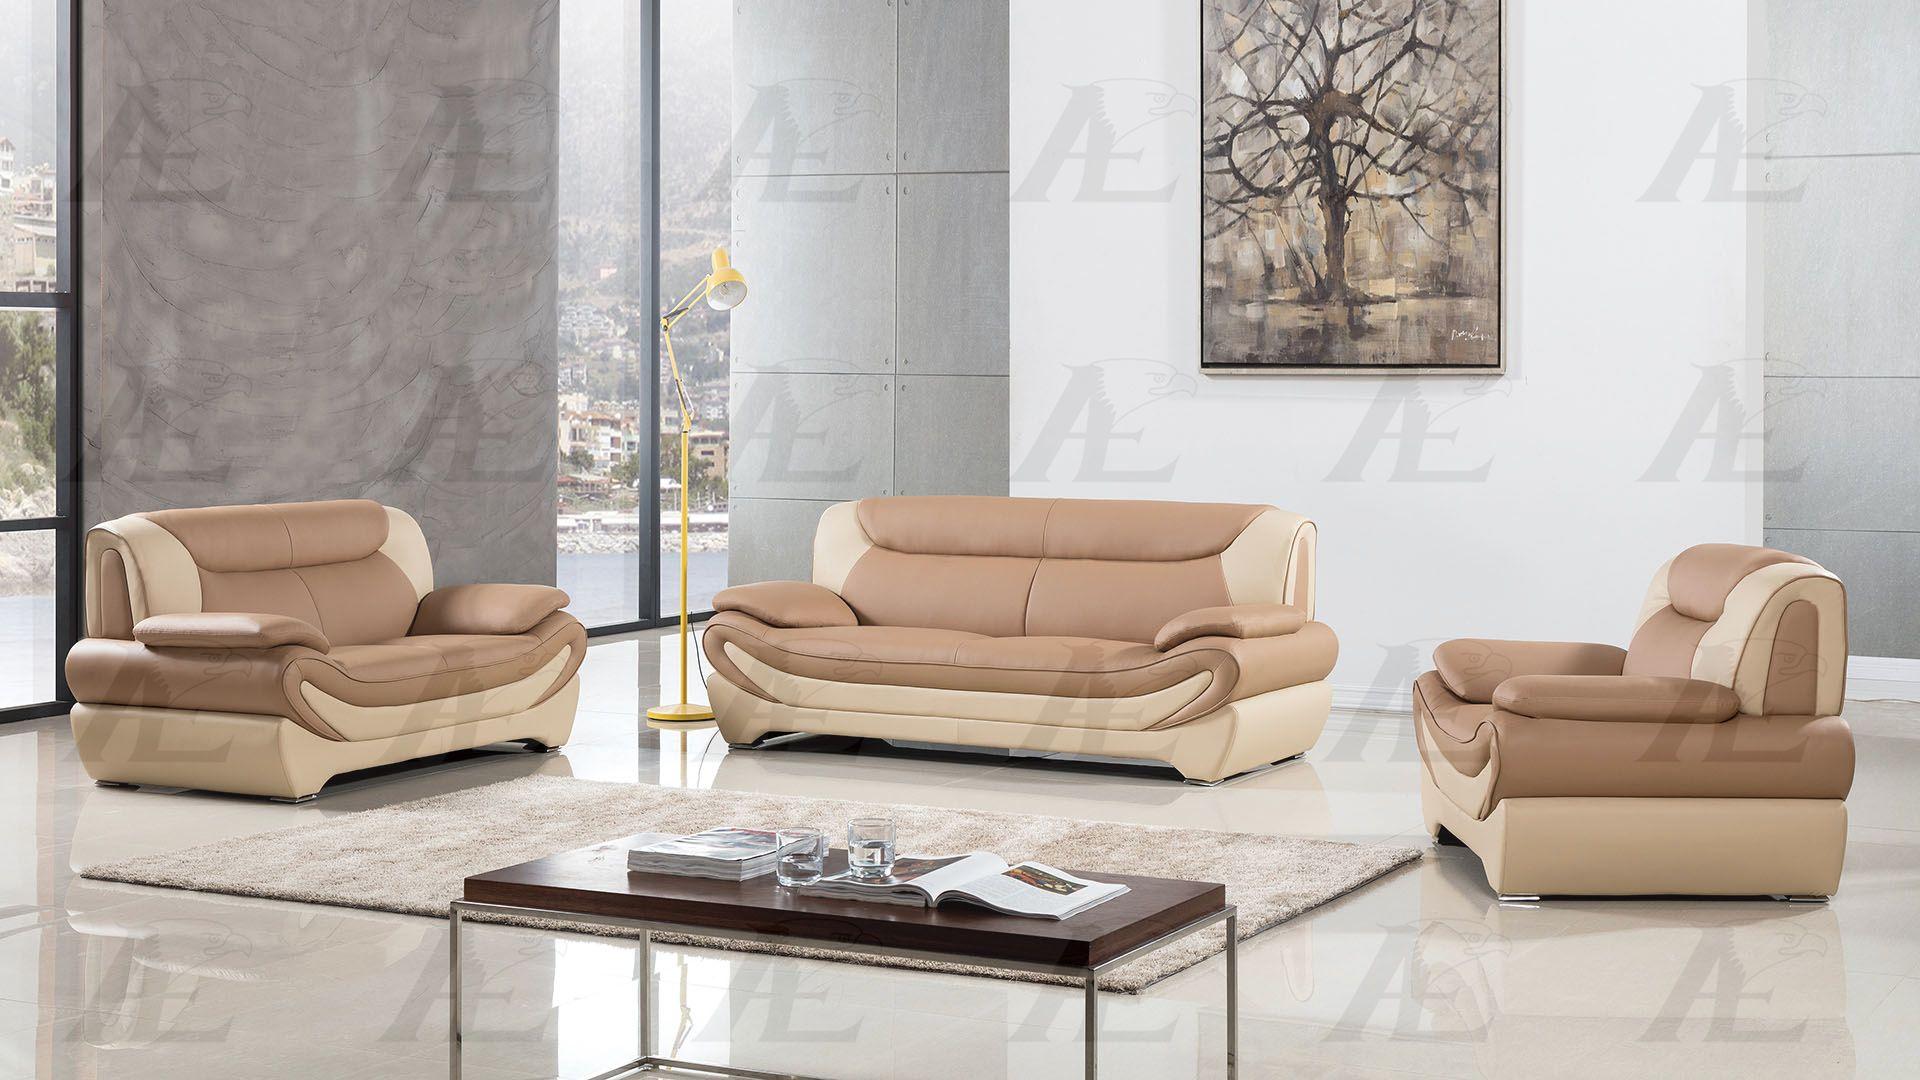 Contemporary, Modern Sofa Set AE209-CA.IV AE209-CA.IV-Set-3 in Camel, Ivory Faux Leather